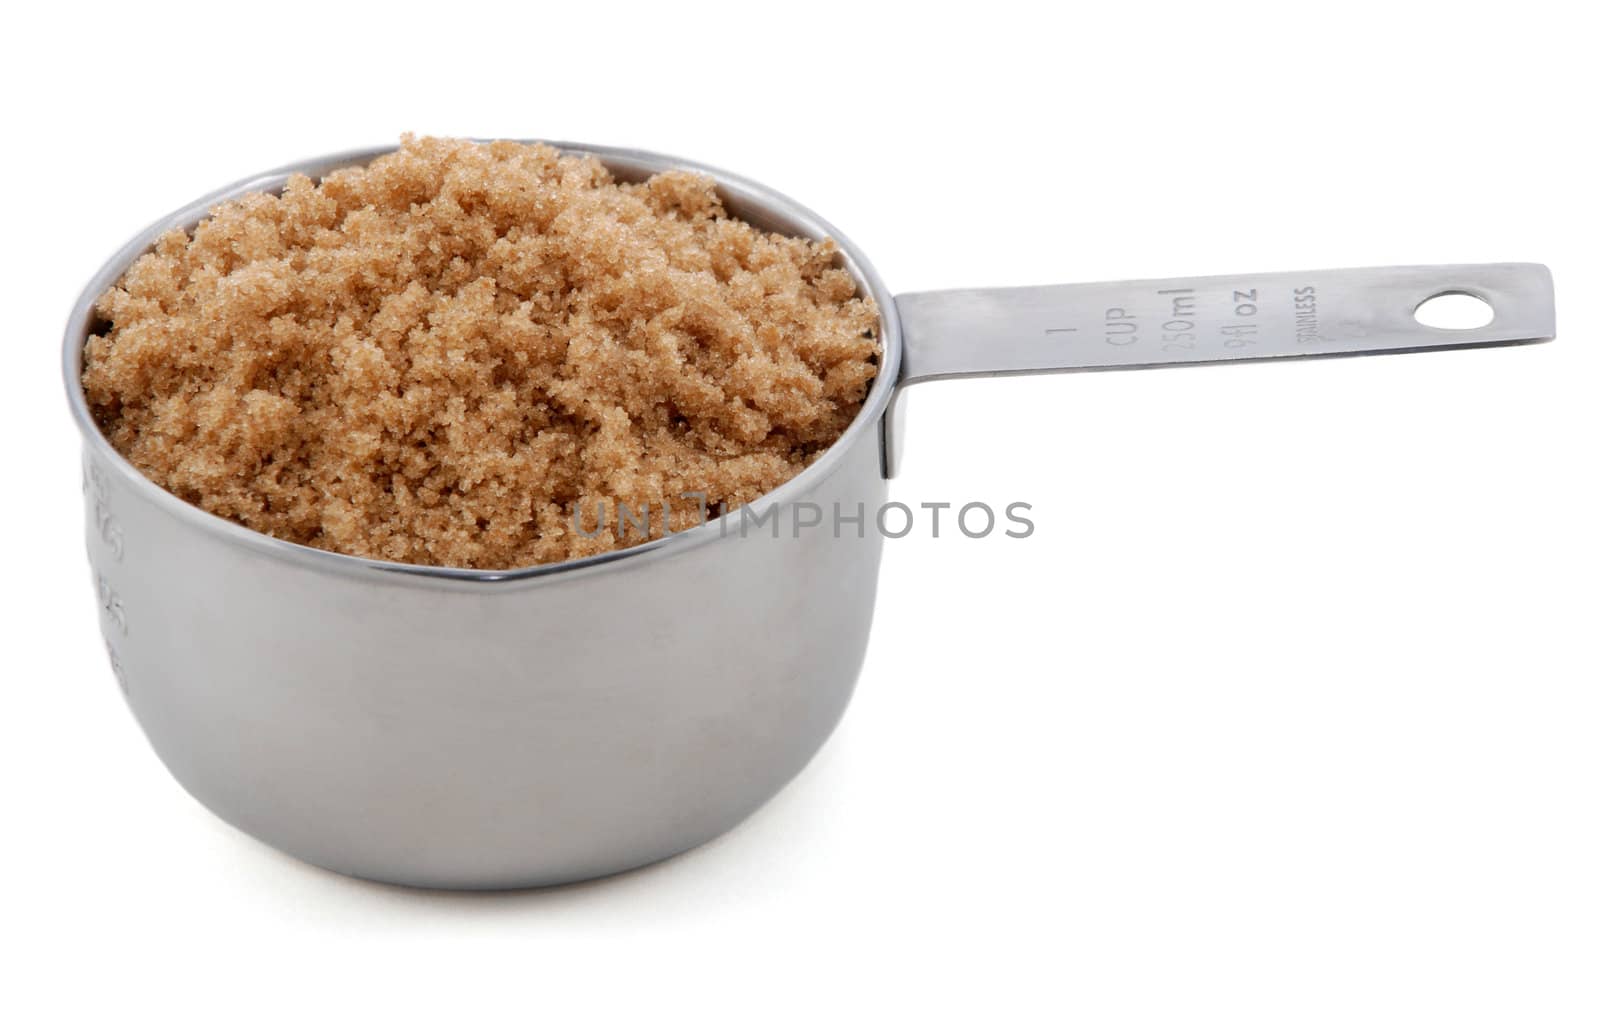 Light brown soft / muscovado sugar presented in an American metal cup measure, isolated on a white background